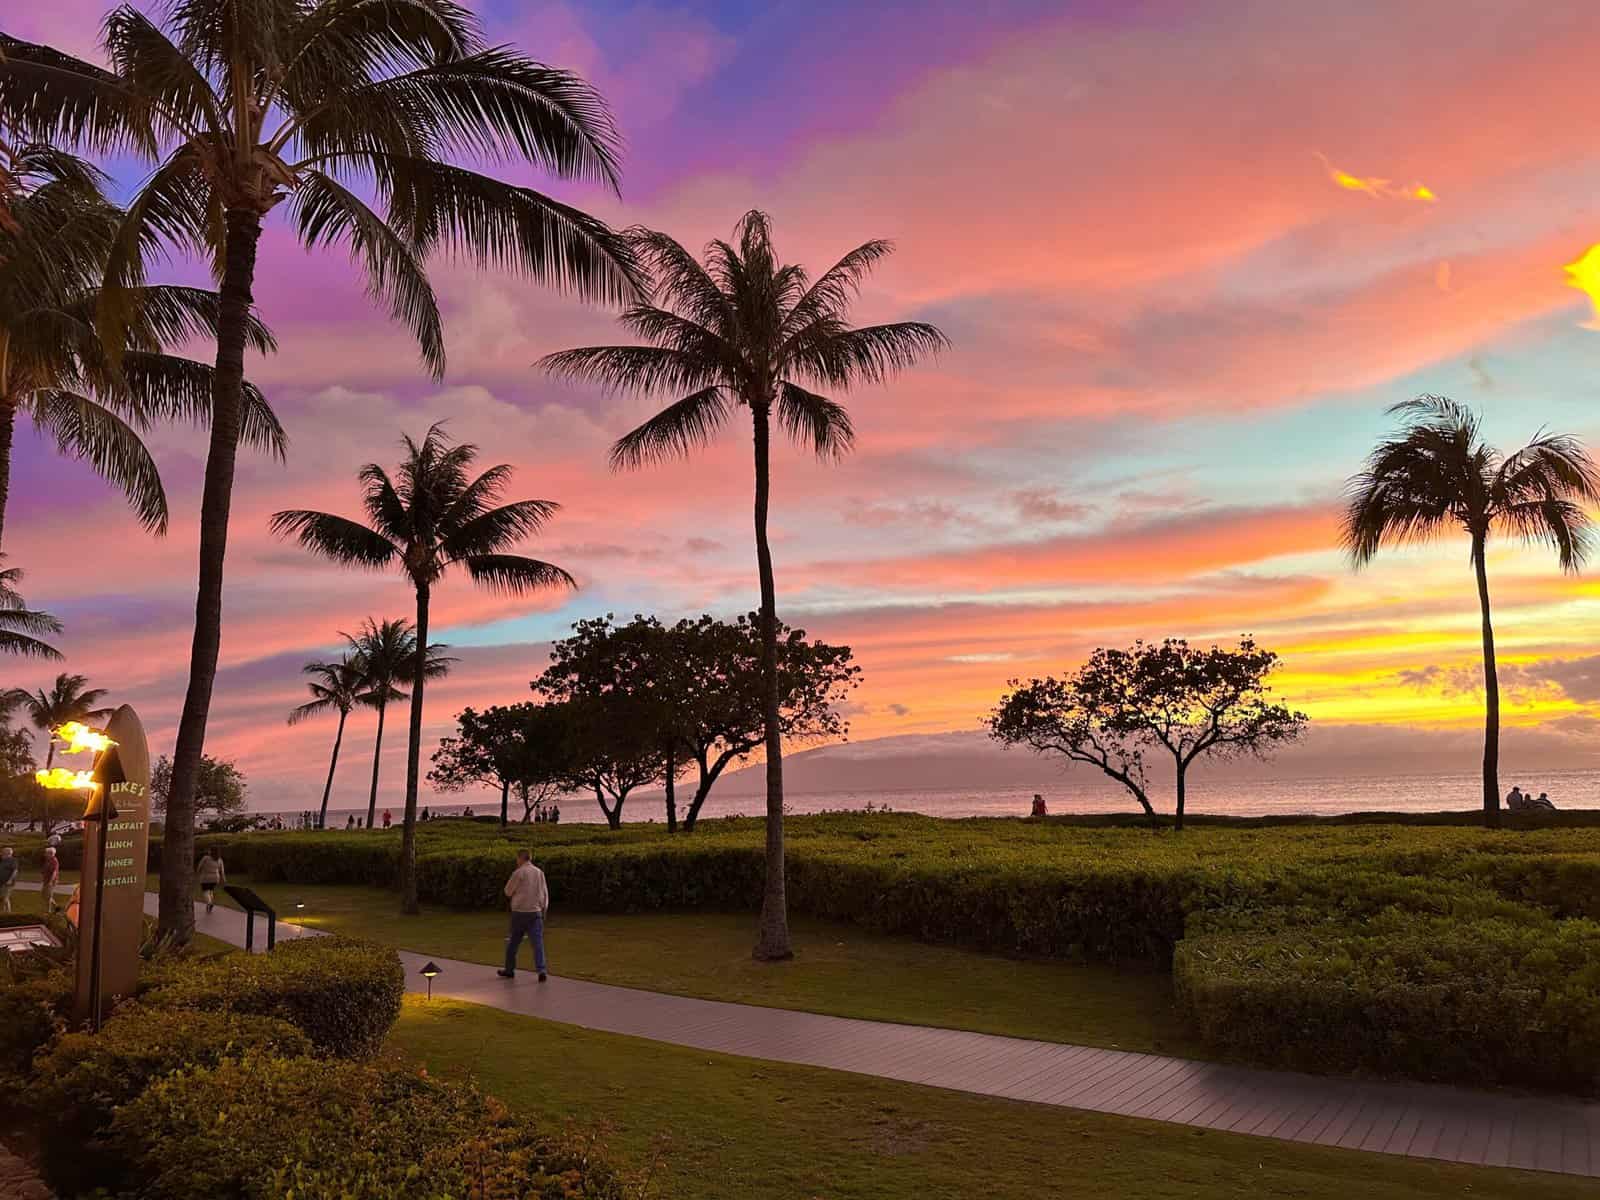 A man is walking down a path with palm trees in the background, heading towards Kaanapali restaurants.